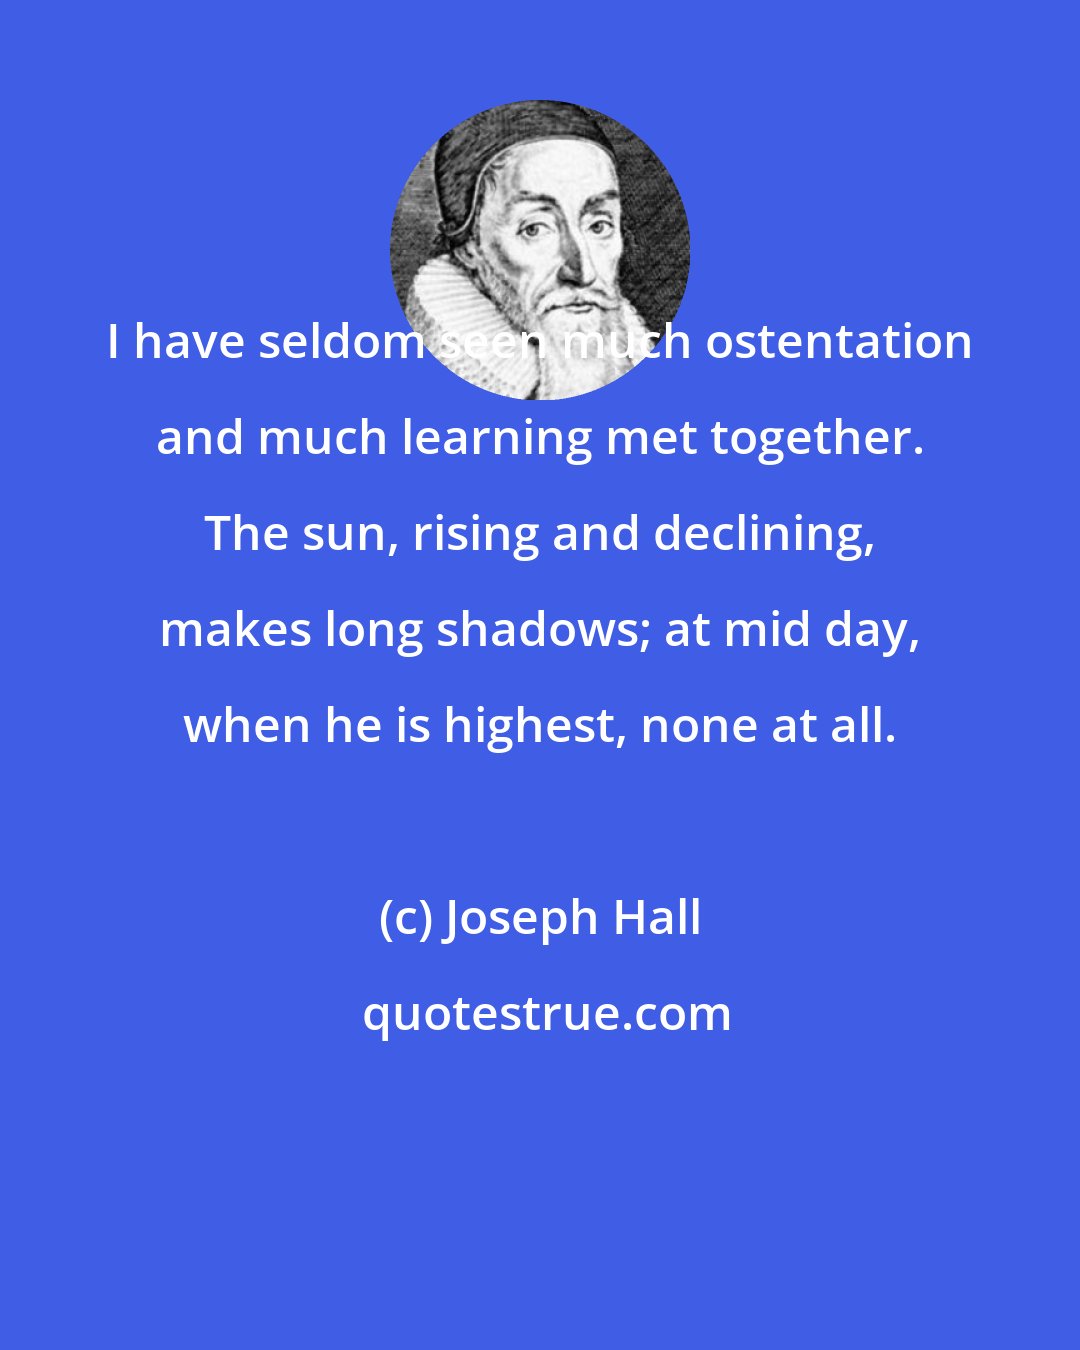 Joseph Hall: I have seldom seen much ostentation and much learning met together. The sun, rising and declining, makes long shadows; at mid day, when he is highest, none at all.